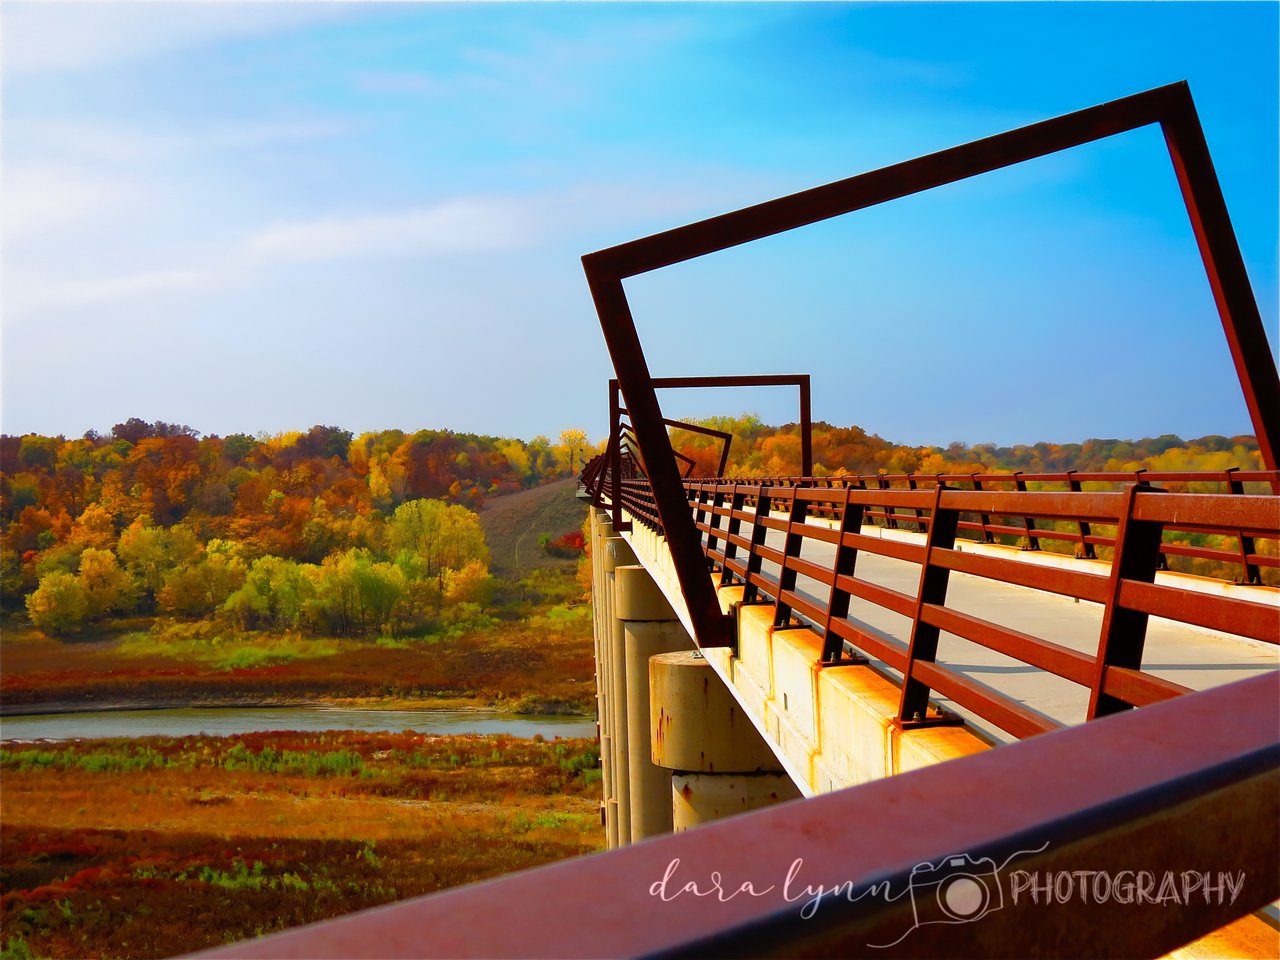 A steel bridge stretches across a vibrant river valley filled with fall foliage.